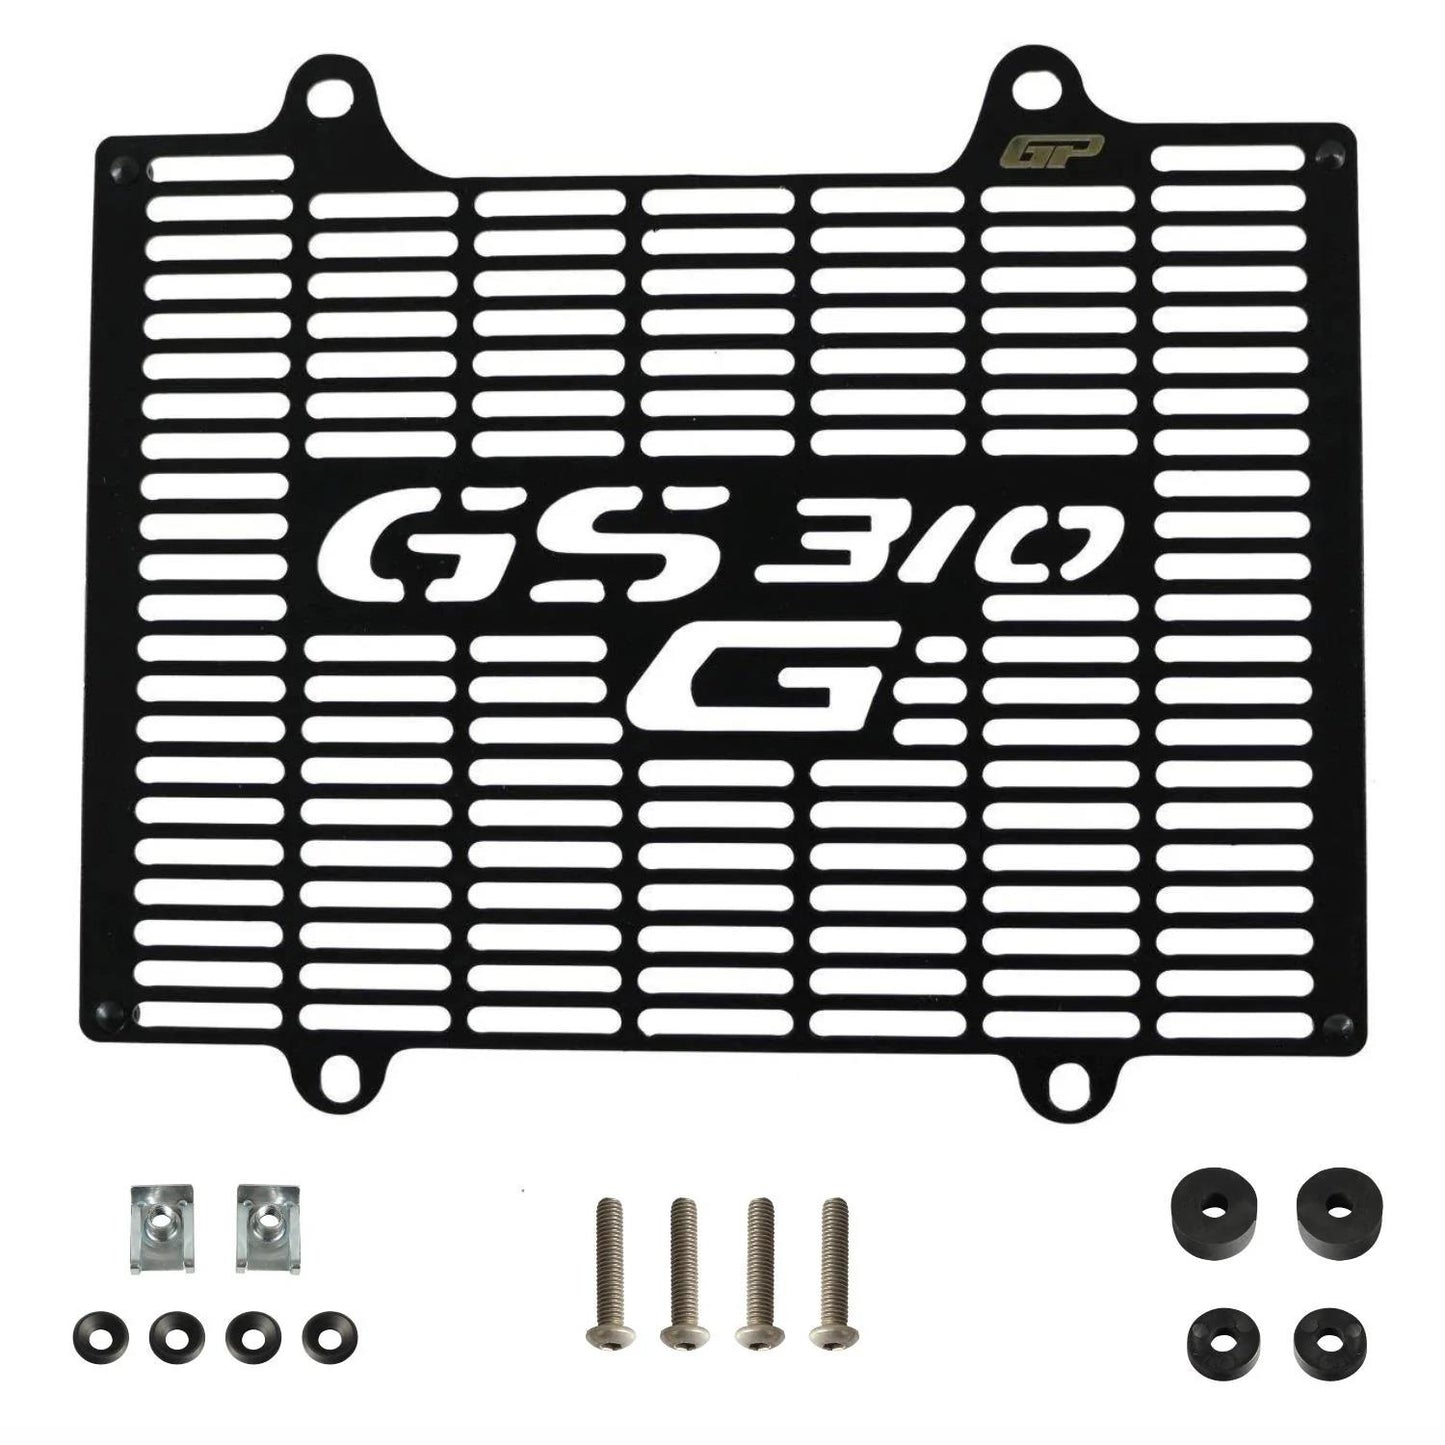 BMW G310 GS radiator grill guard protector cover 17-23